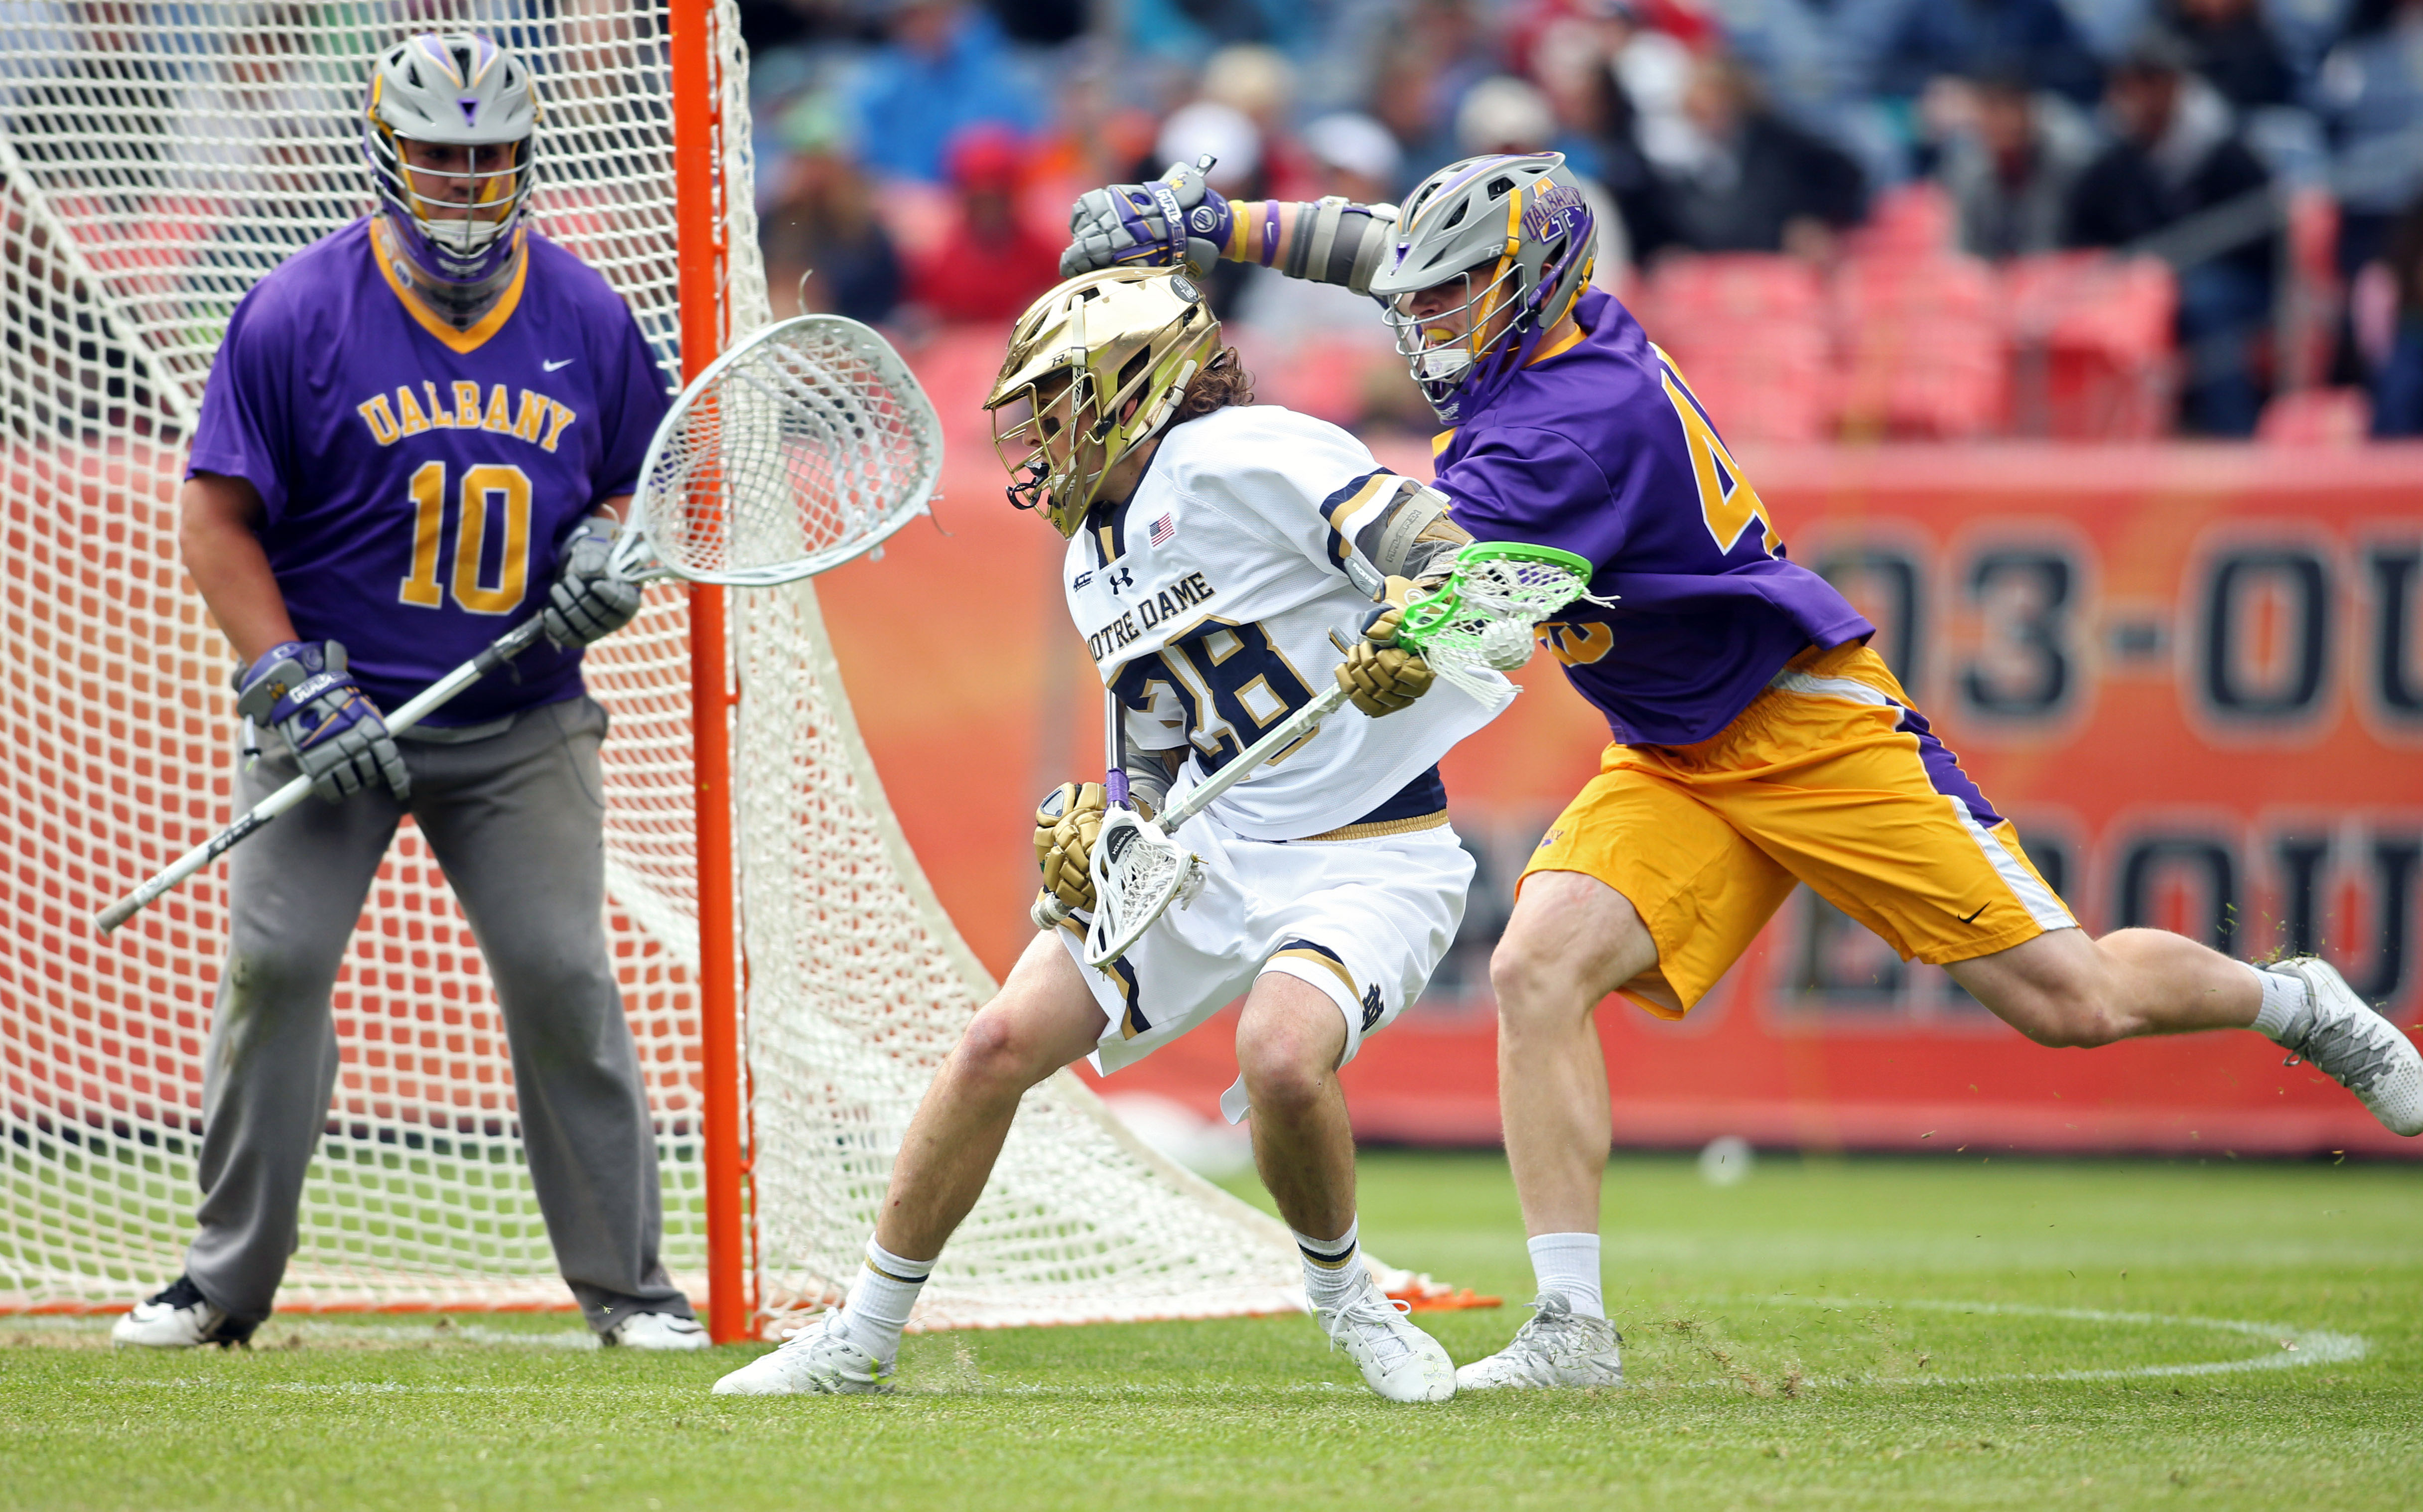 Albany lacrosse continues run of success, despite losing player of the